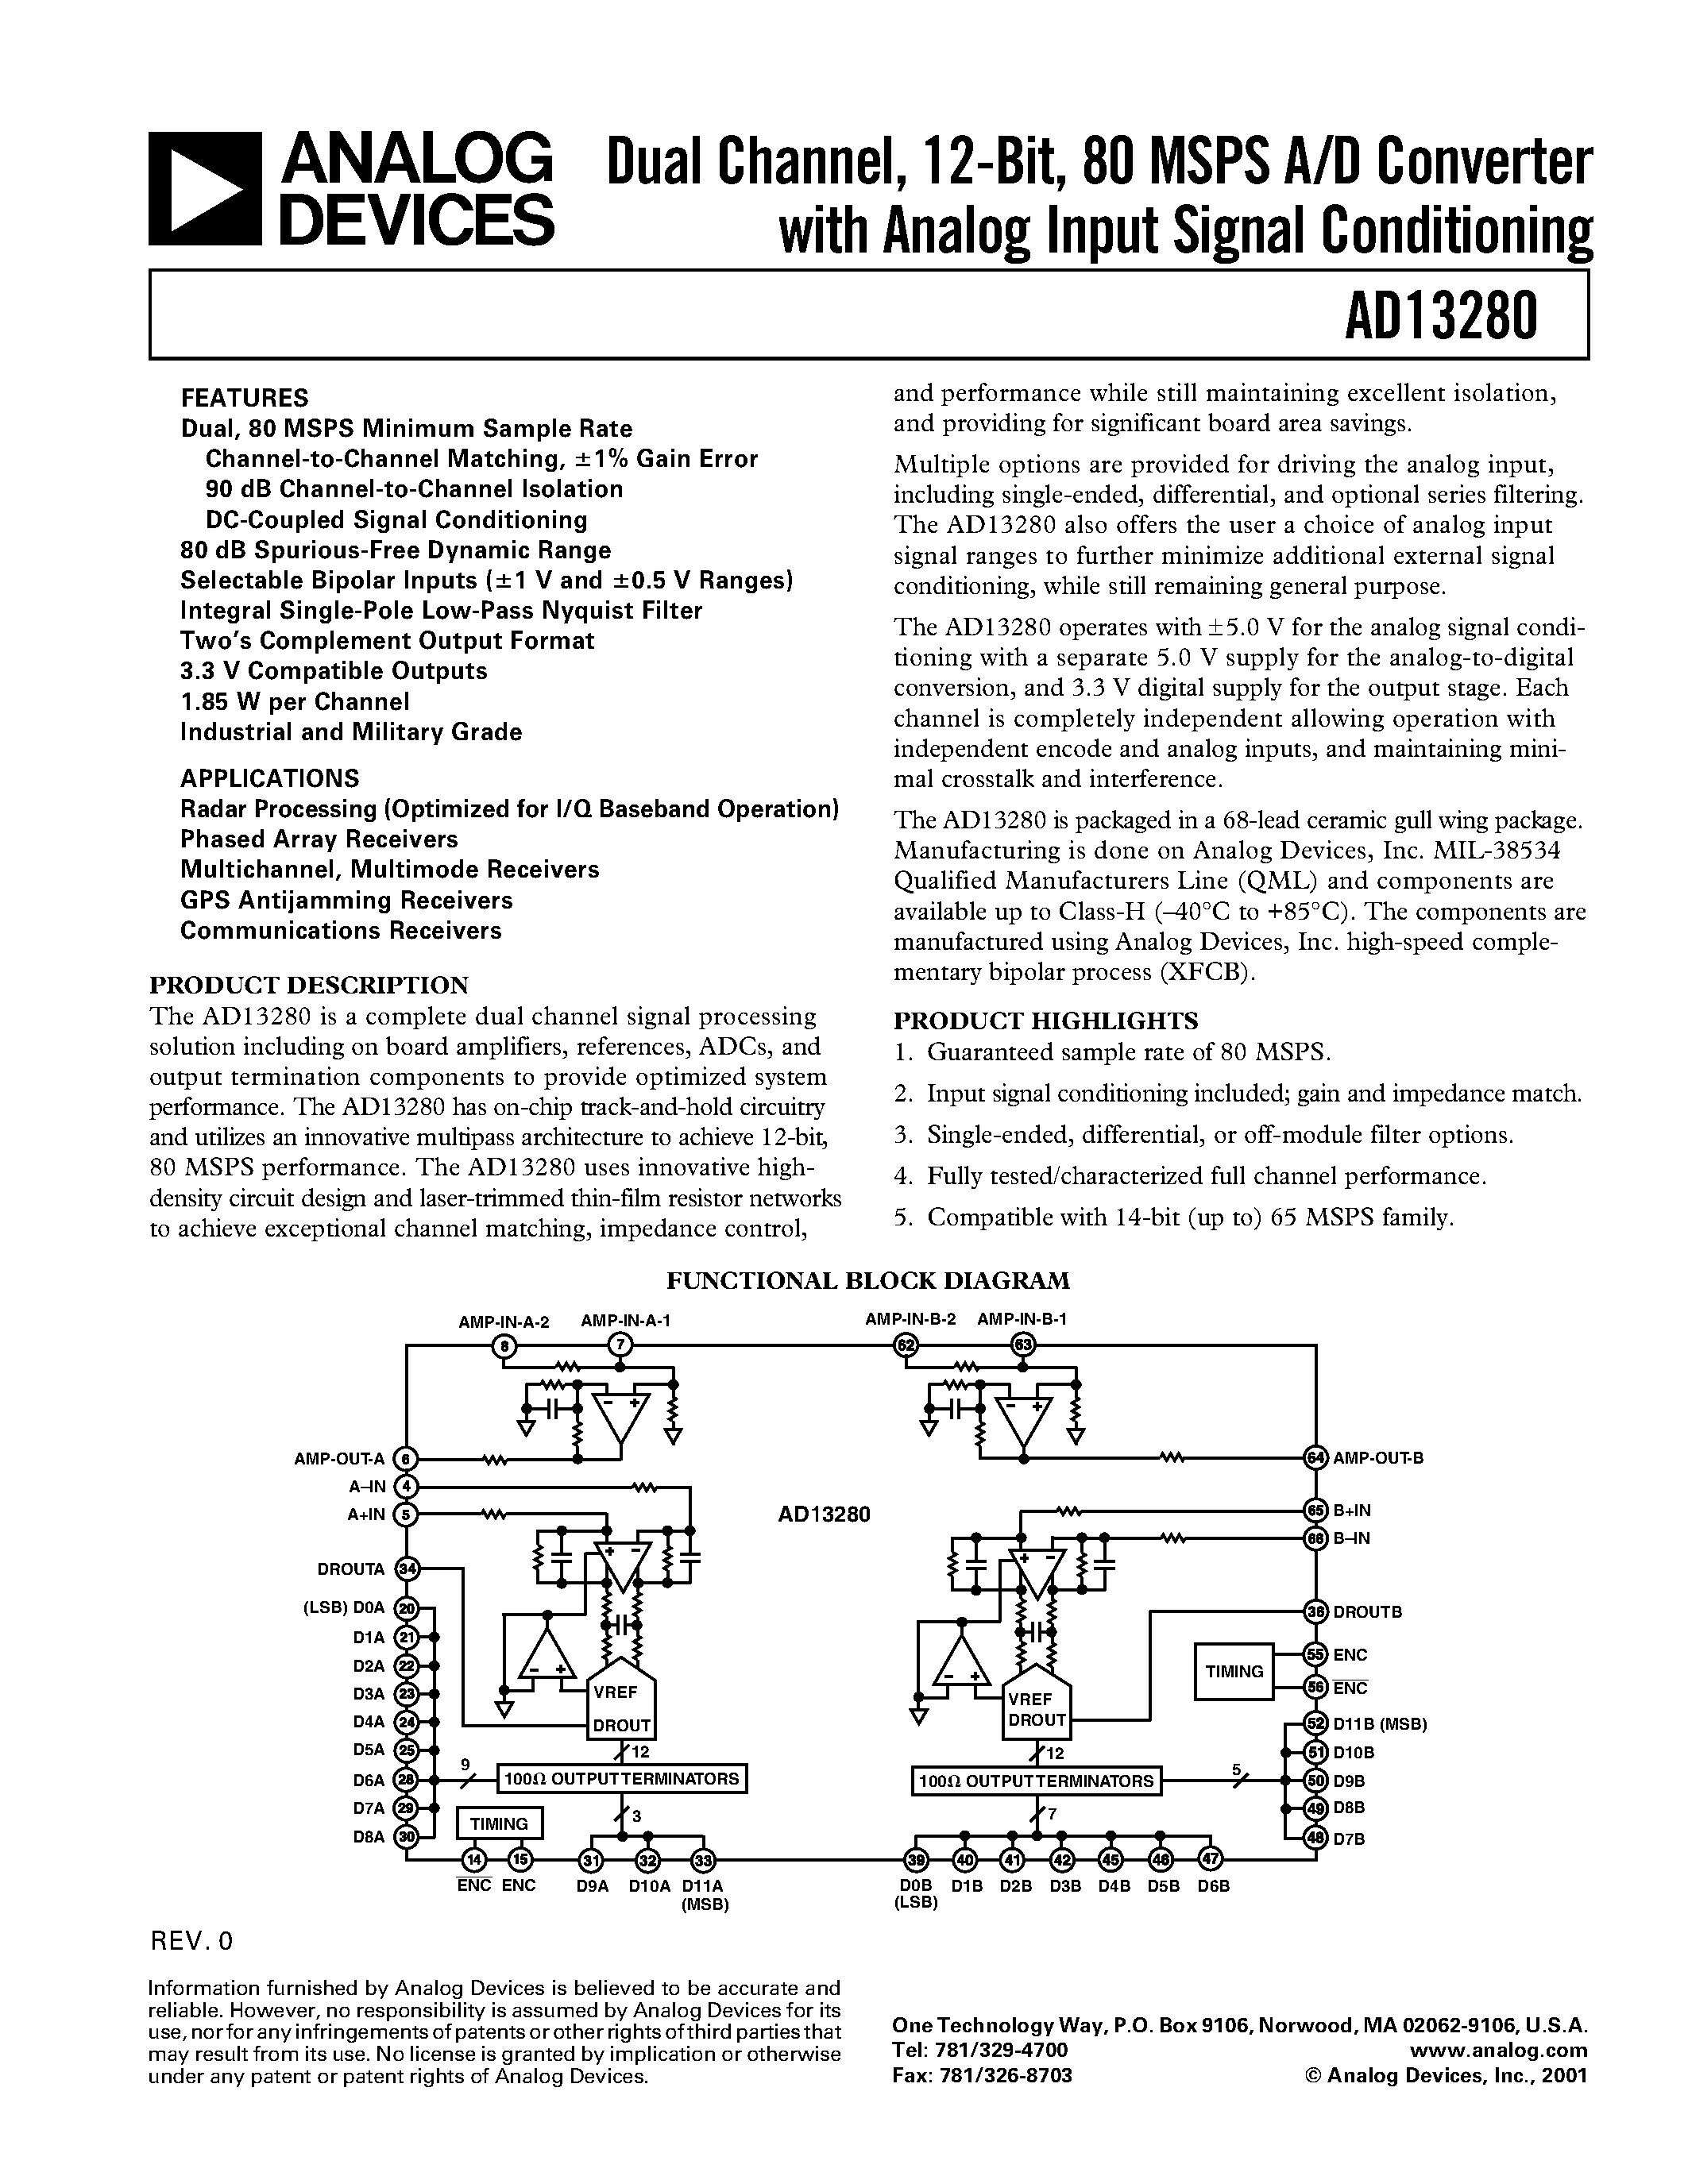 Datasheet AD13280 - Dual Channel/ 12-Bit/ 80 MSPS A/D Converter with Analog Input Signal Conditioning page 1